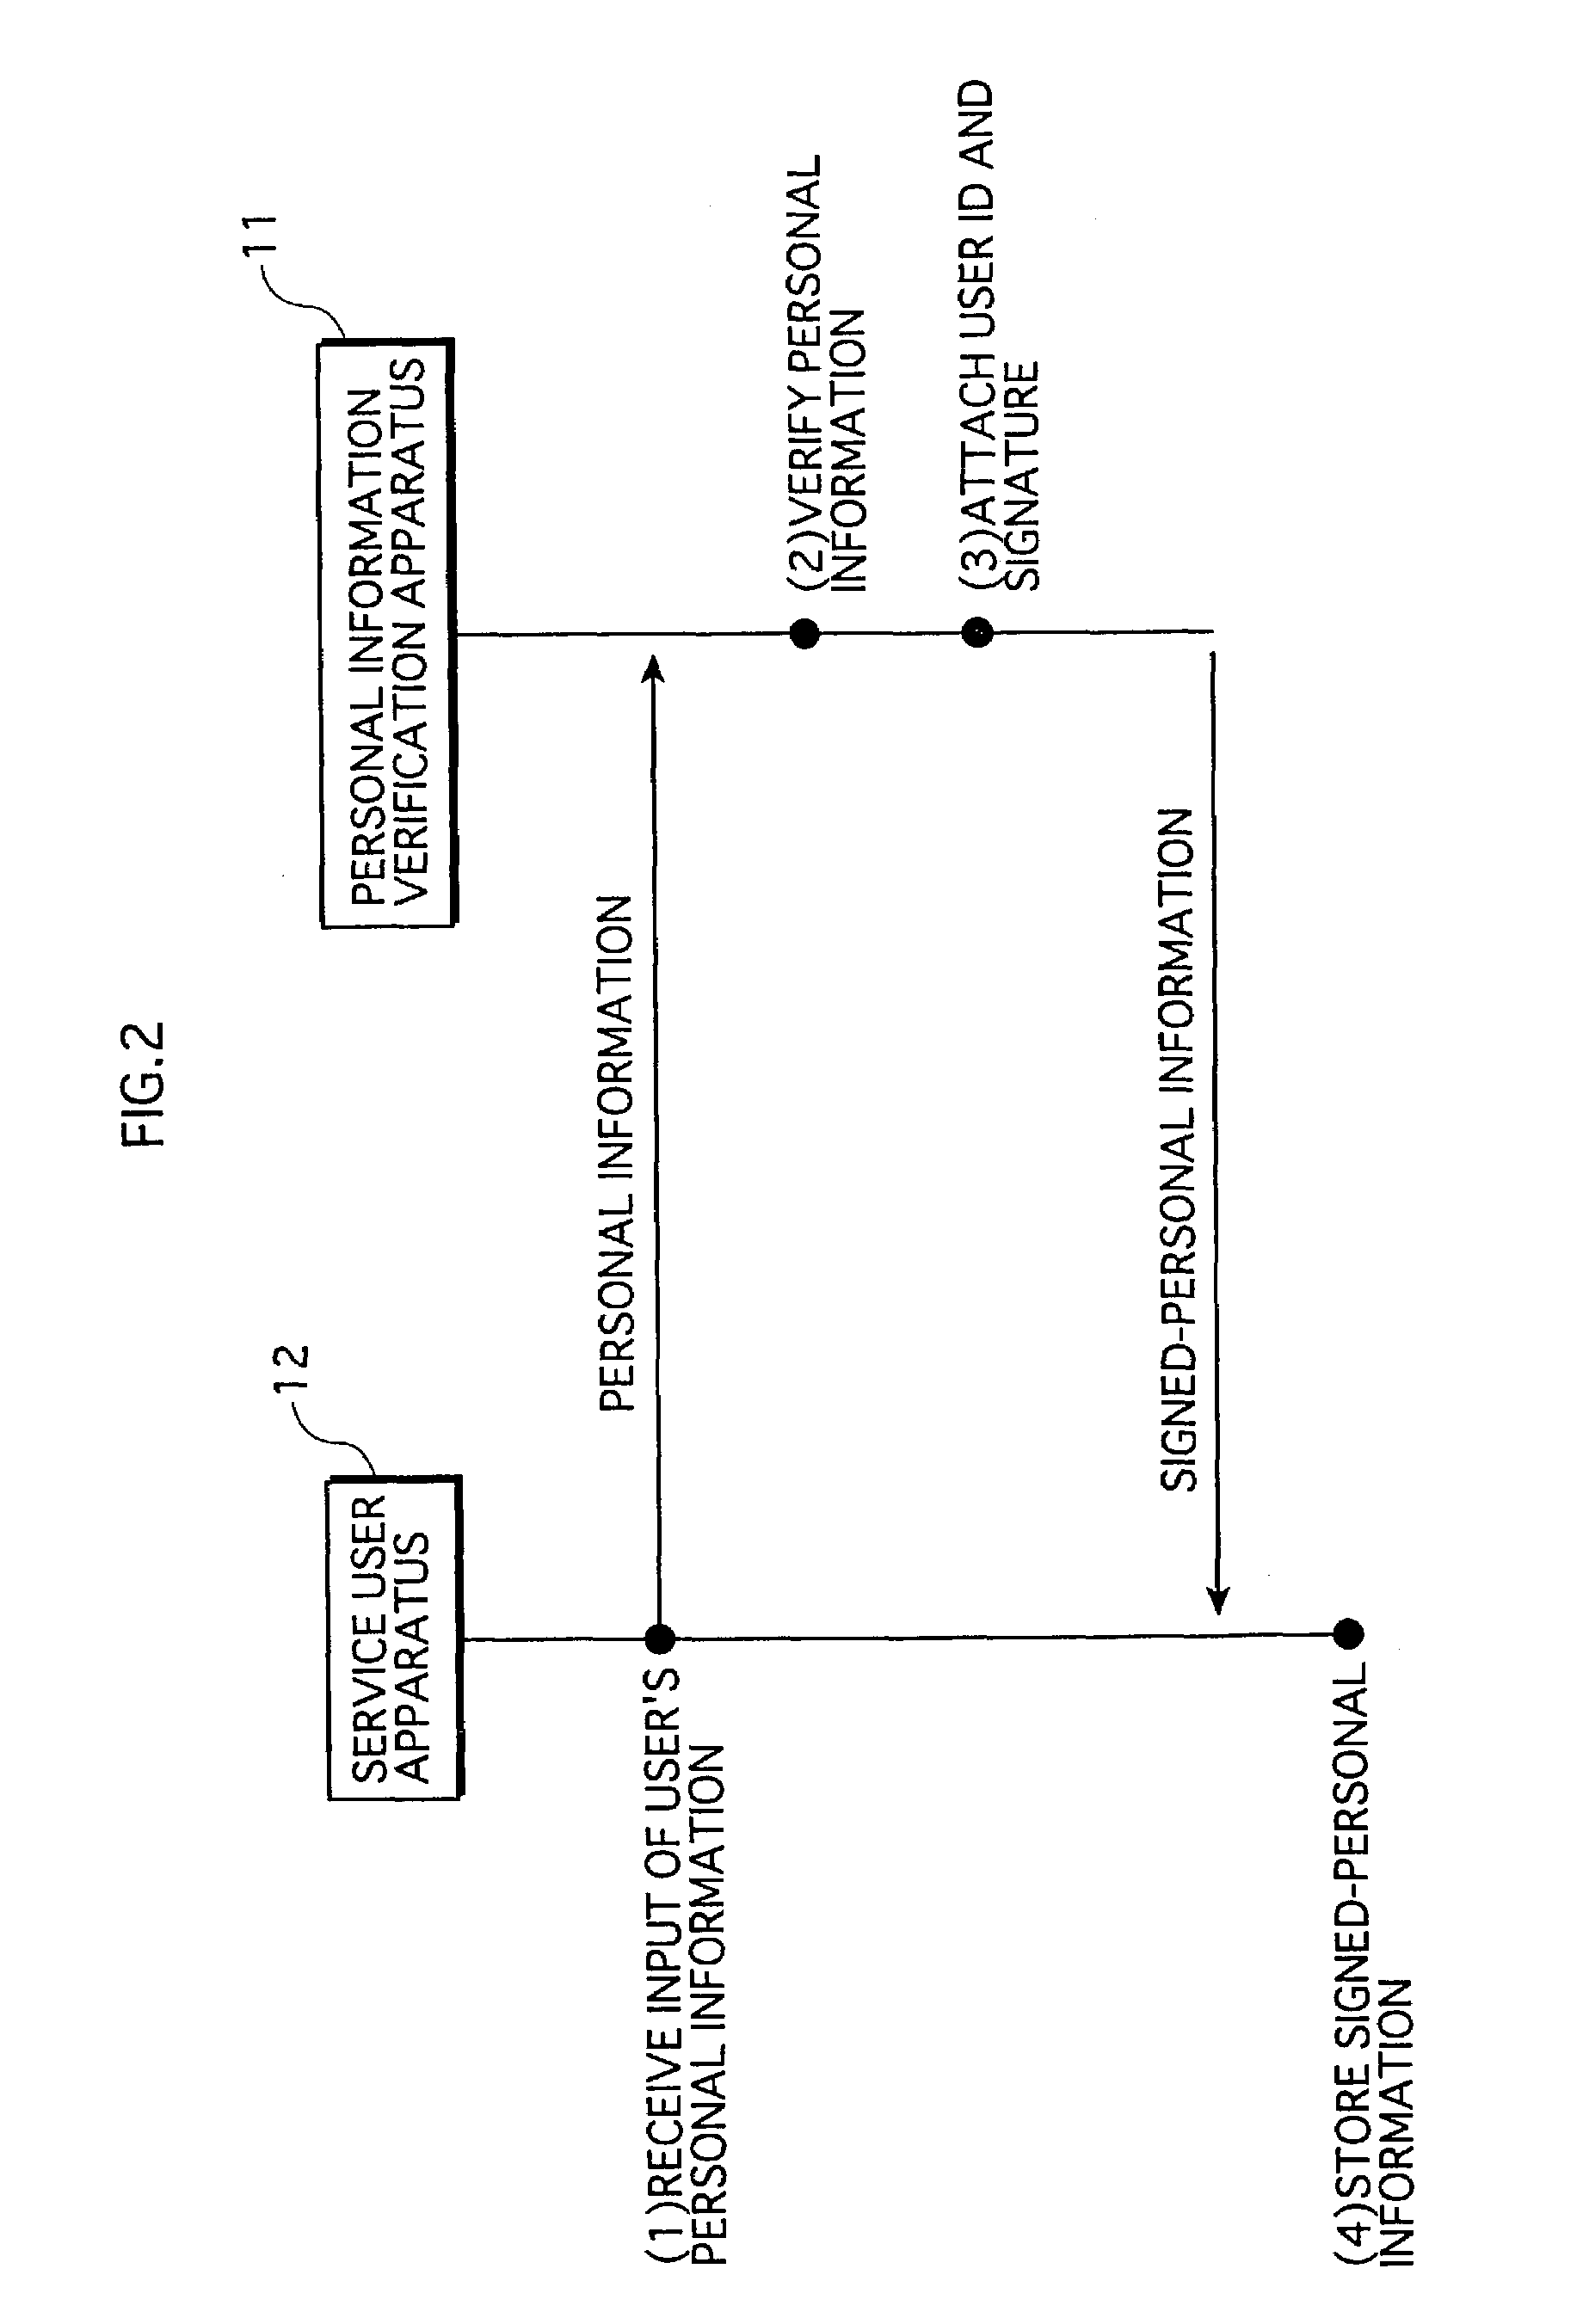 Service providing system in which services are provided from service provider apparatus to service user apparatus via network